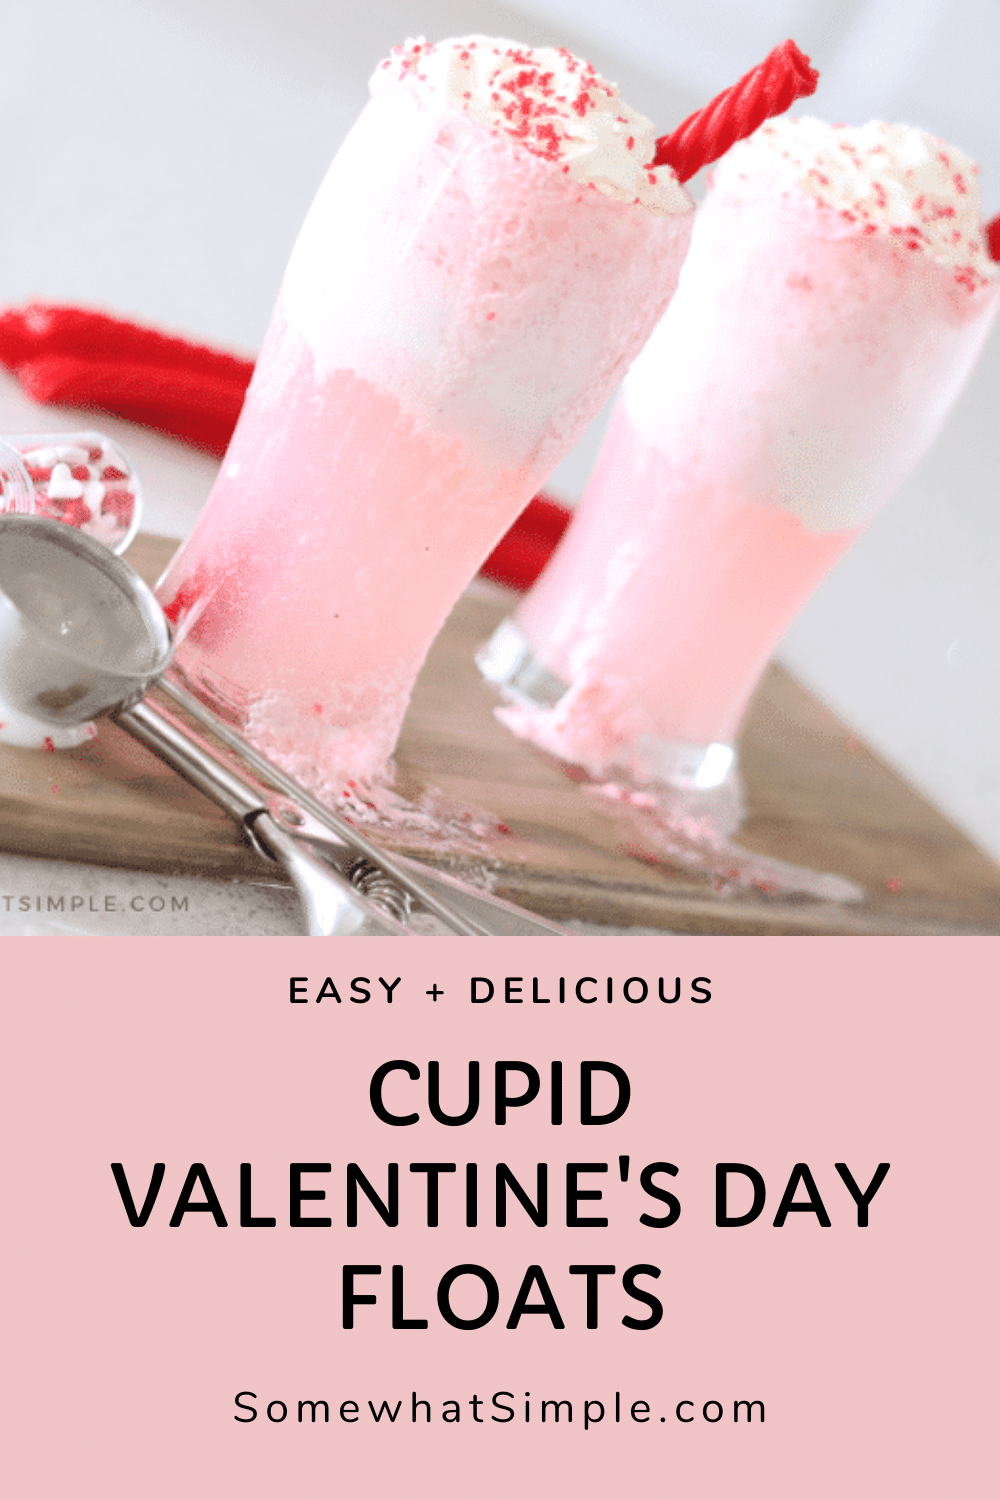 Cupid floats are a simple Valentine's Day drink idea that everyone is sure to LOVE!  Made with just a couple easy ingredients these drinks are a fun and festive way to celebrate Valentine's Day. It's a delicious treat everyone will love! via @somewhatsimple